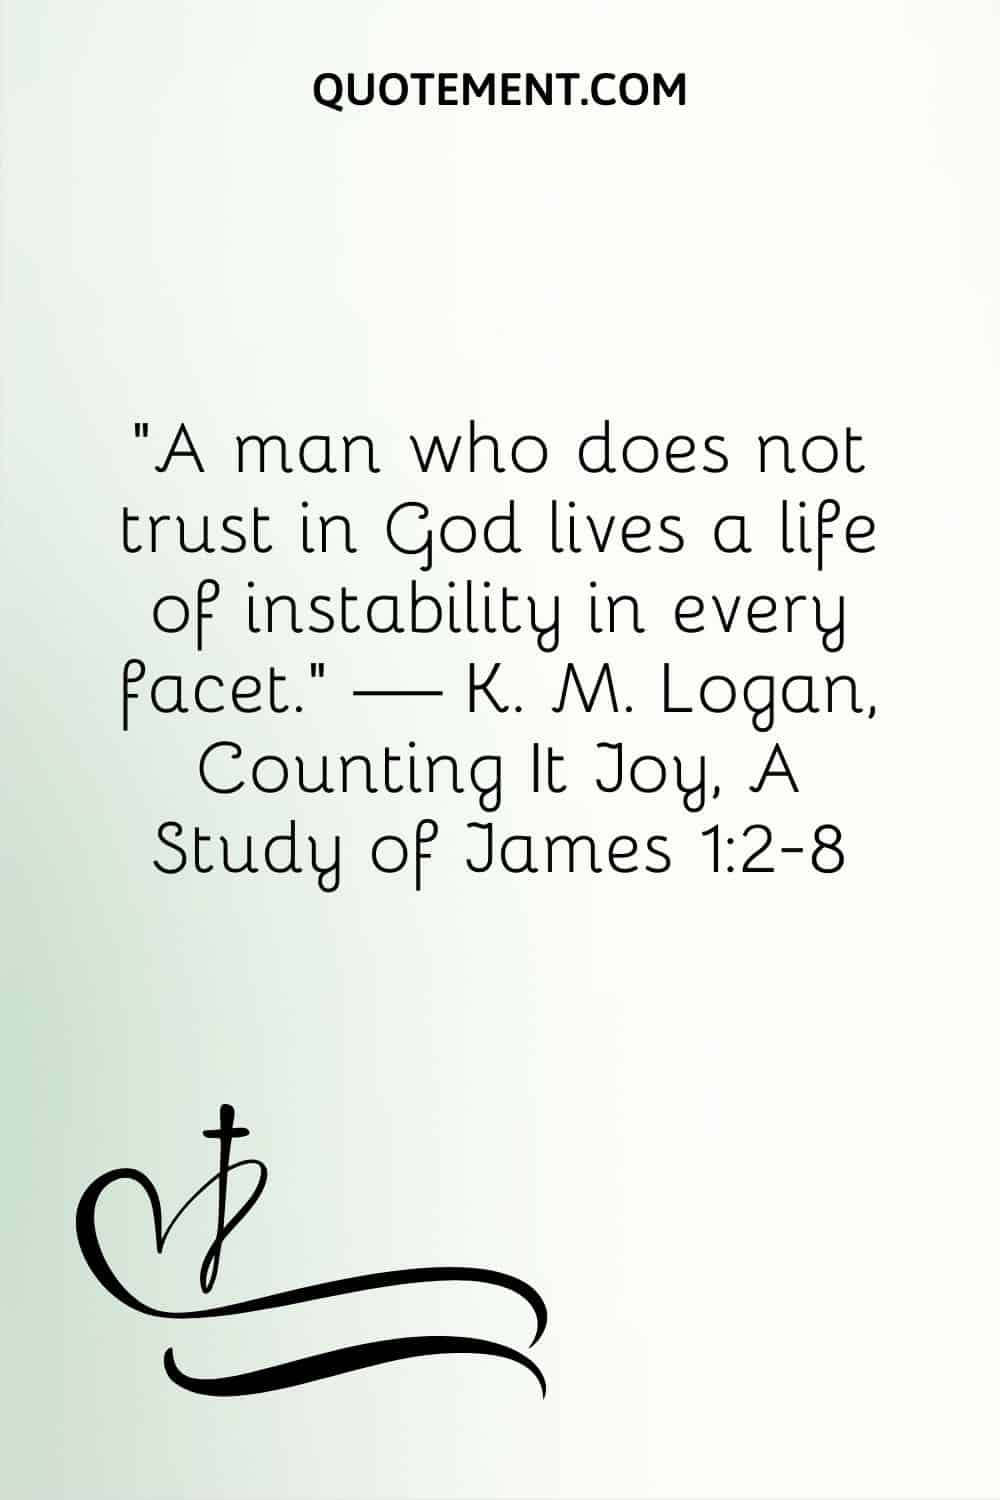 A man who does not trust in God lives a life of instability in every facet